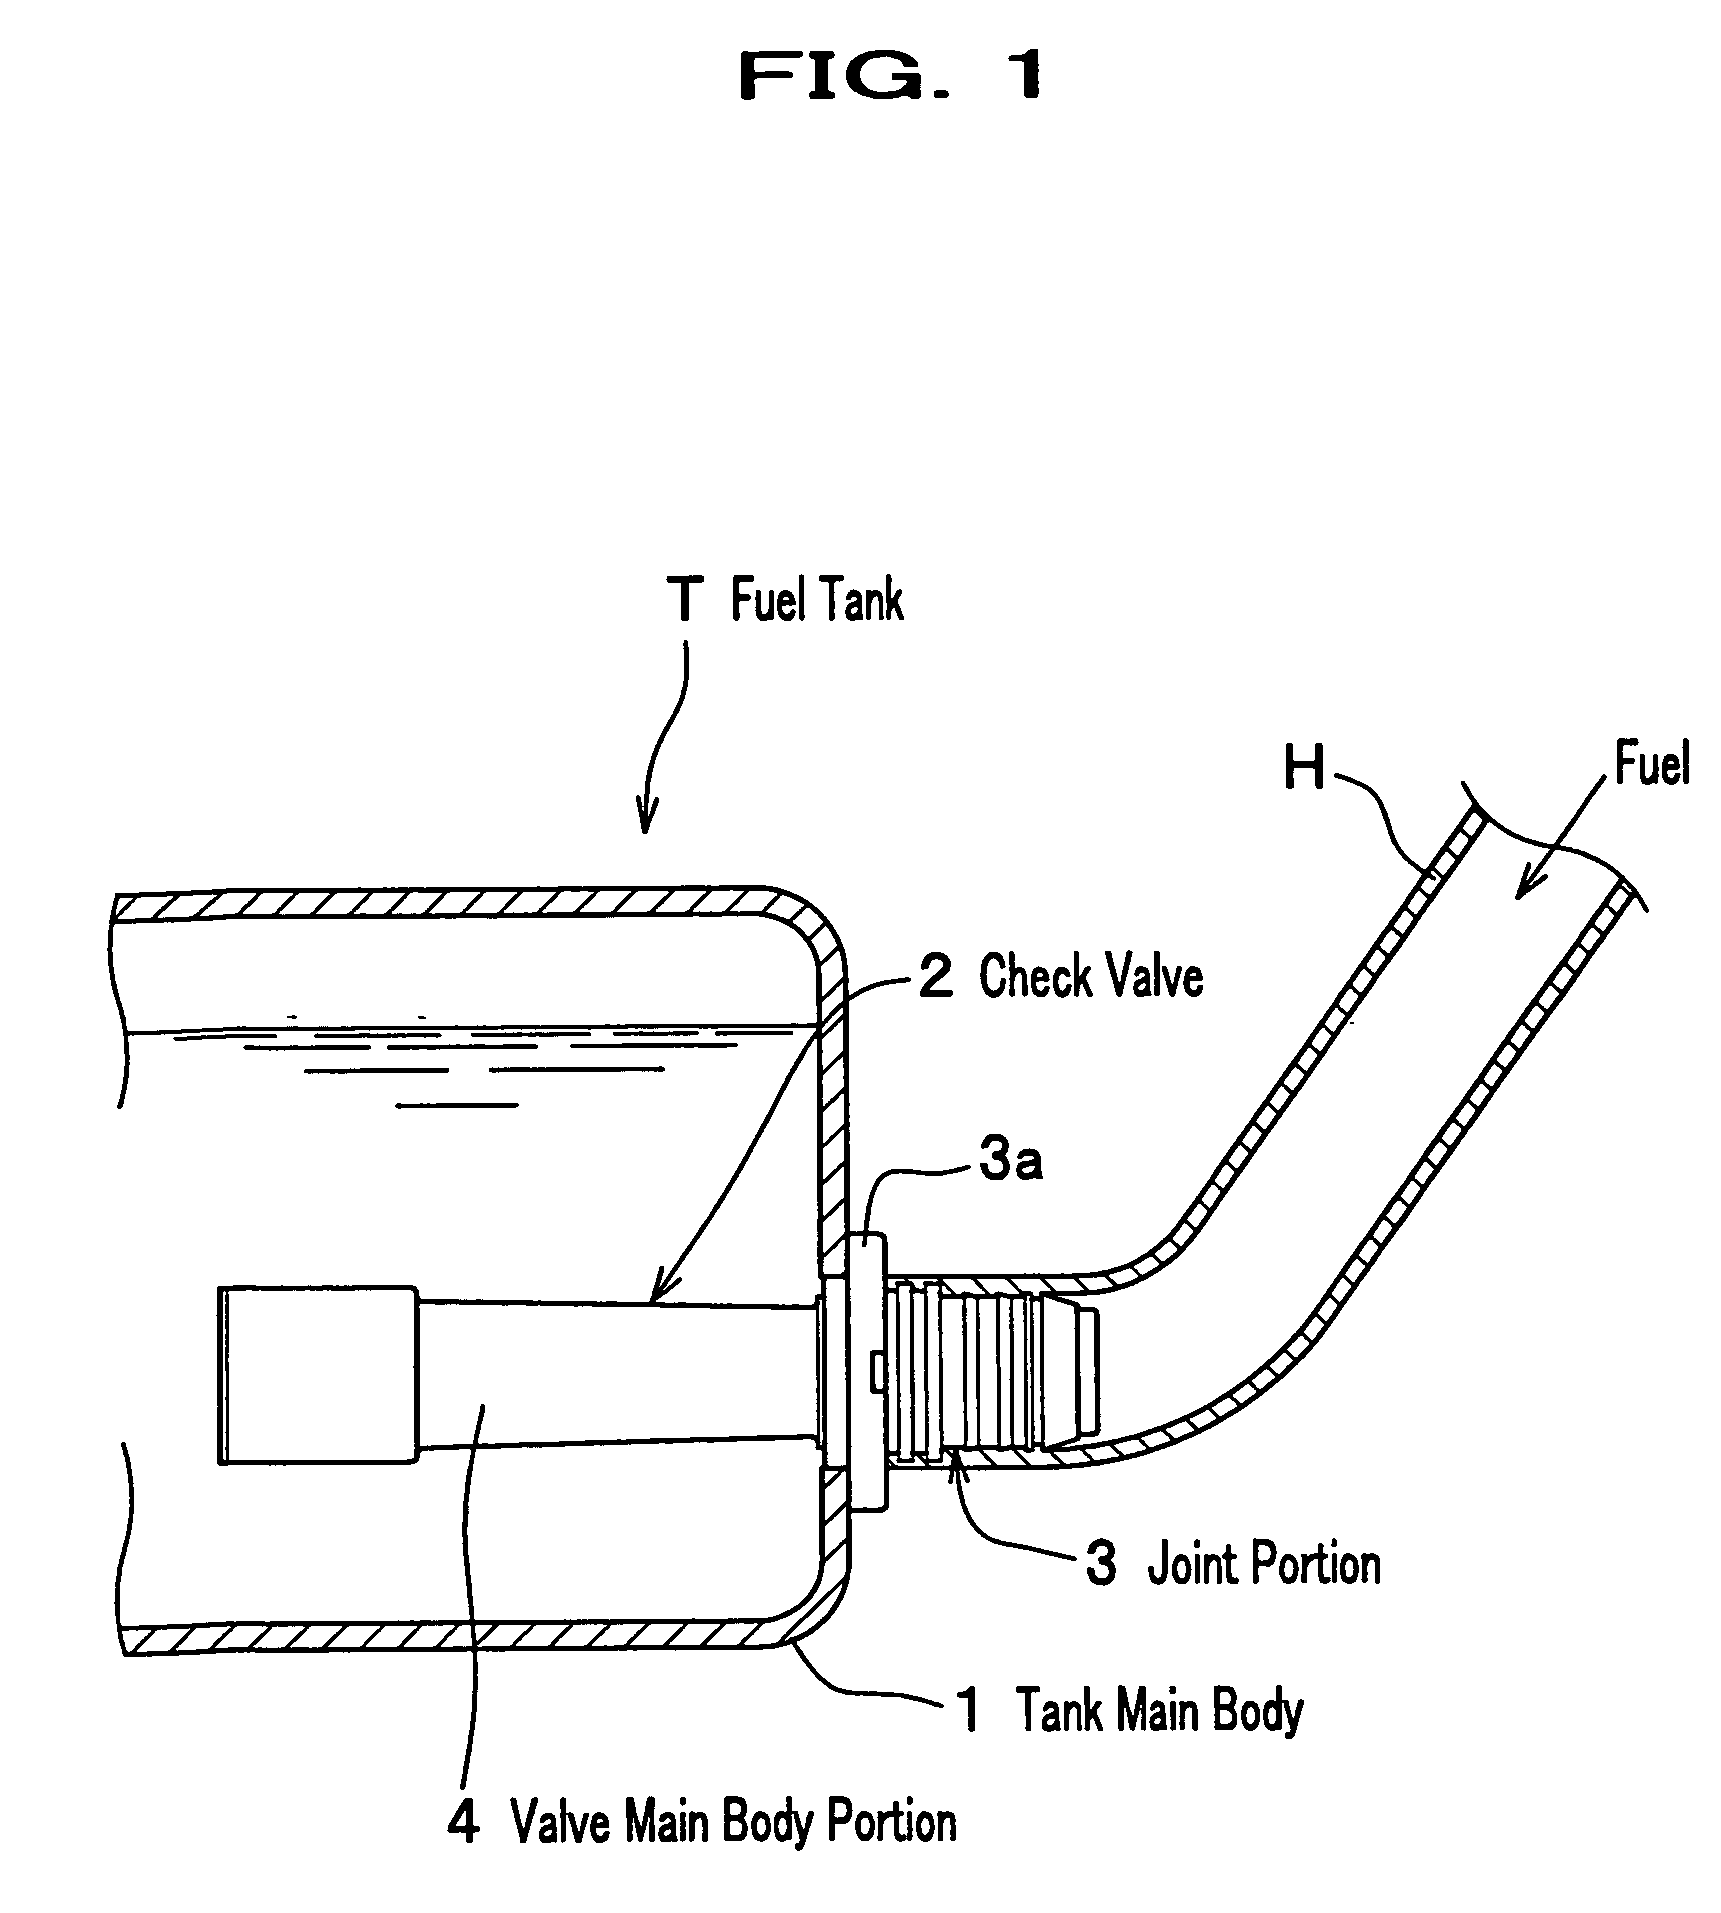 Attachment structure of a component in a fuel tank made of resin